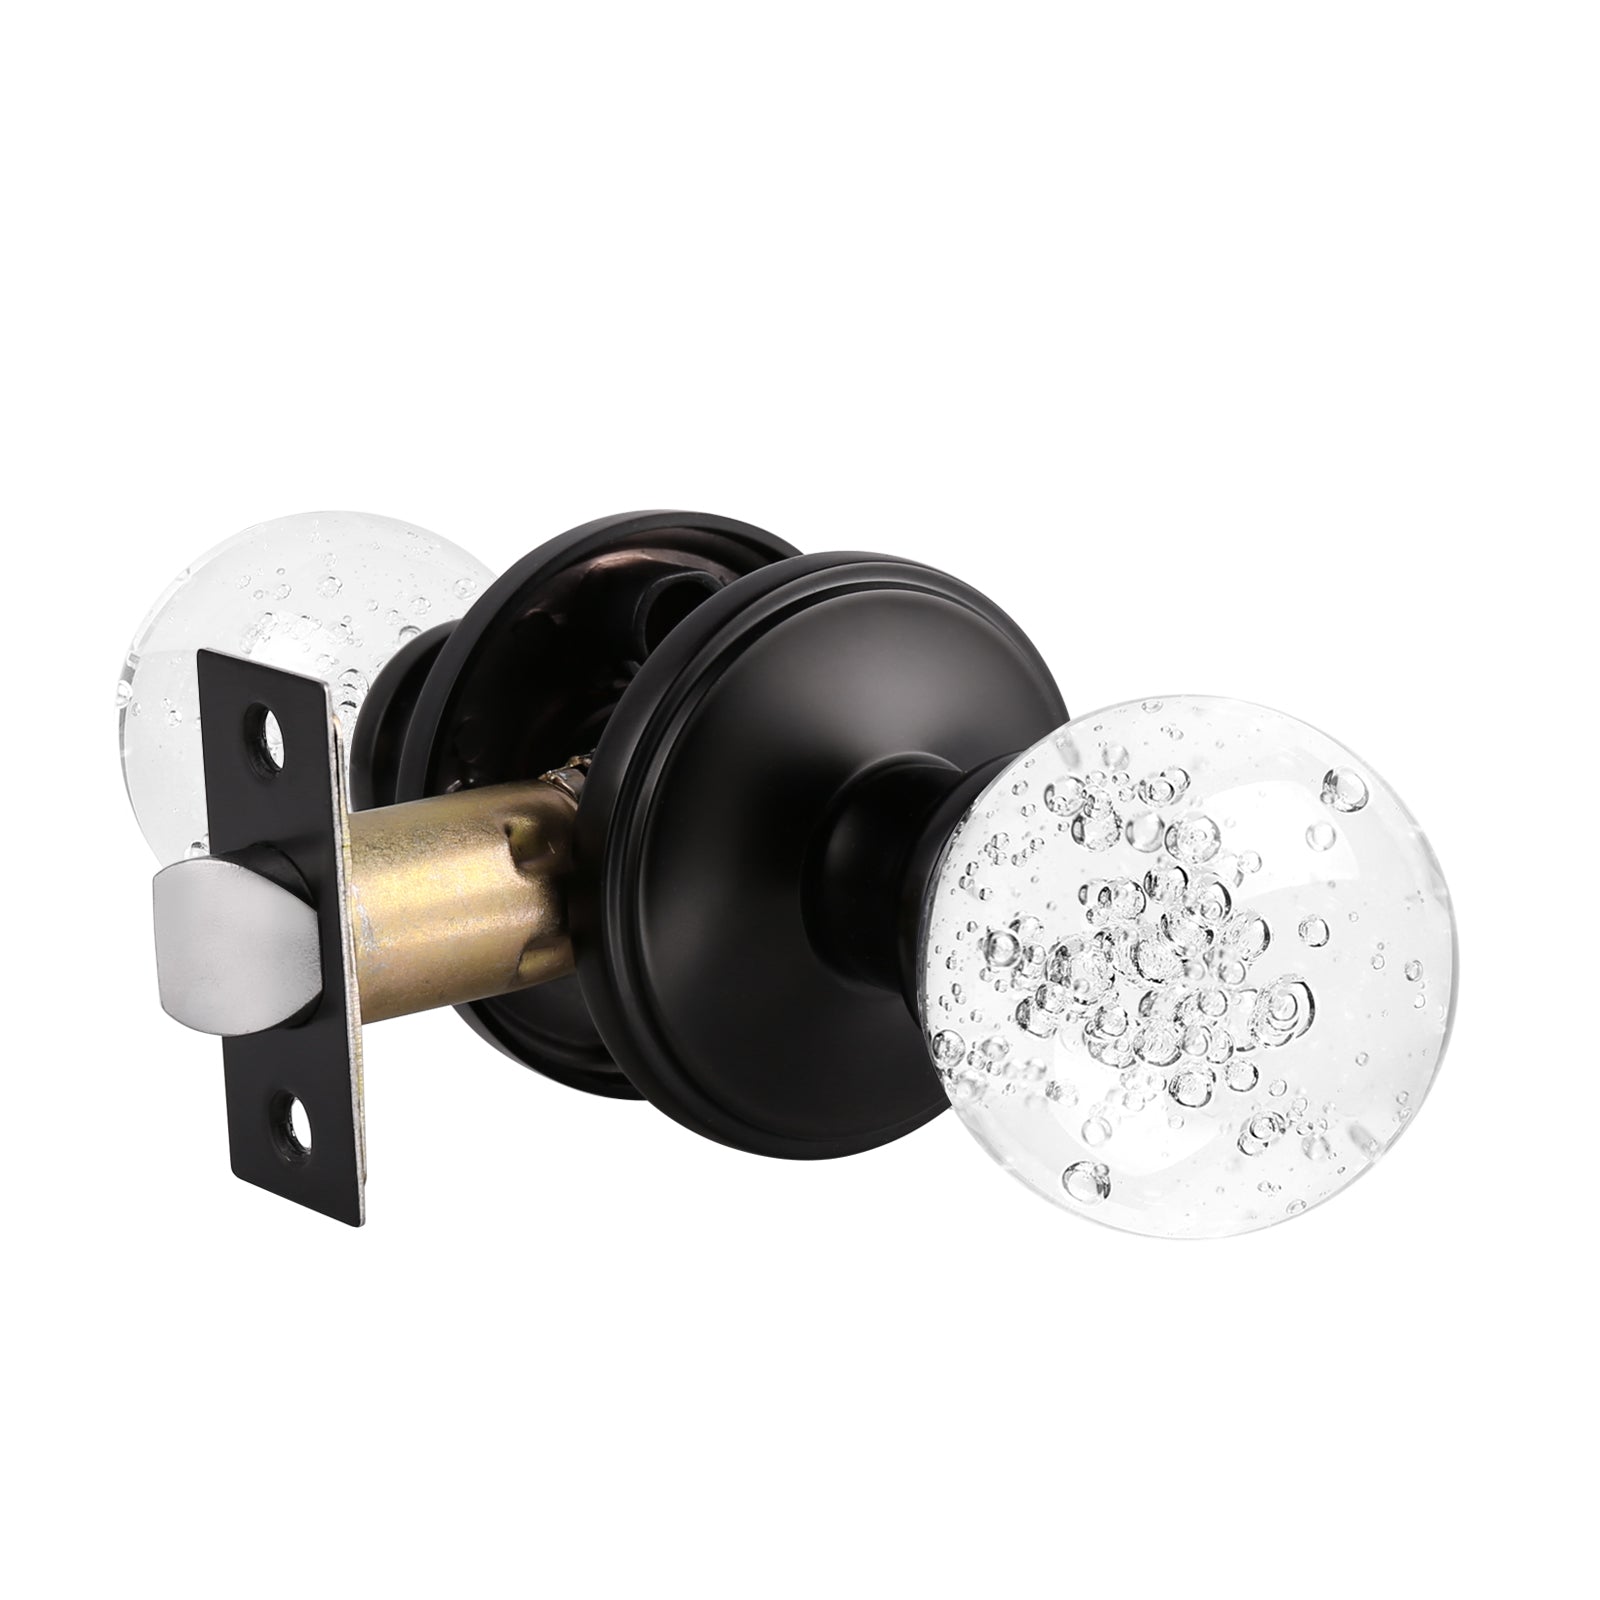 Crystal Glass Door Knobs in Round Ball Style, Passage/Privacy Knob, Black Finish DLC23BOBK